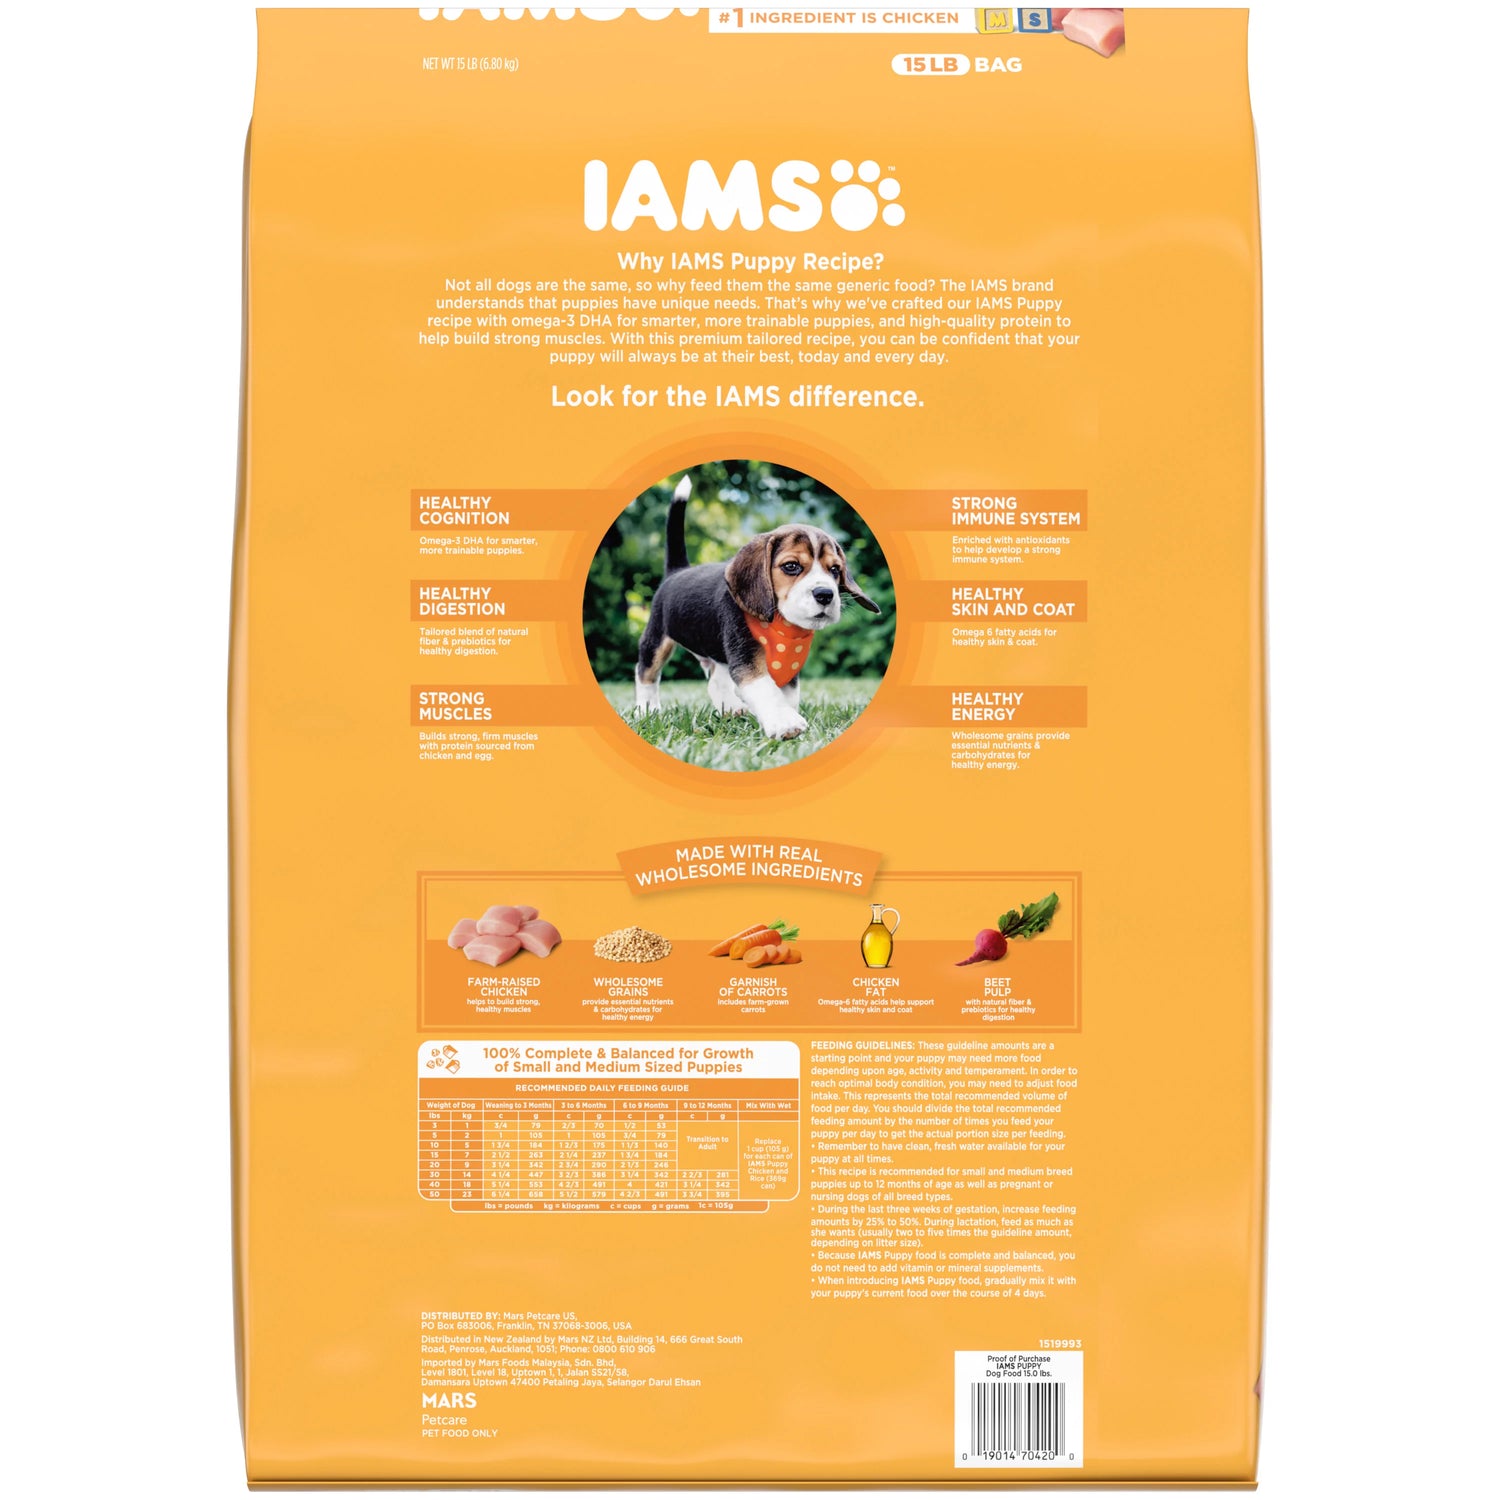 IAMS Smart Puppy Chicken & Whole Grains Dry Dog Food for Puppy, 15 Lb. Bag